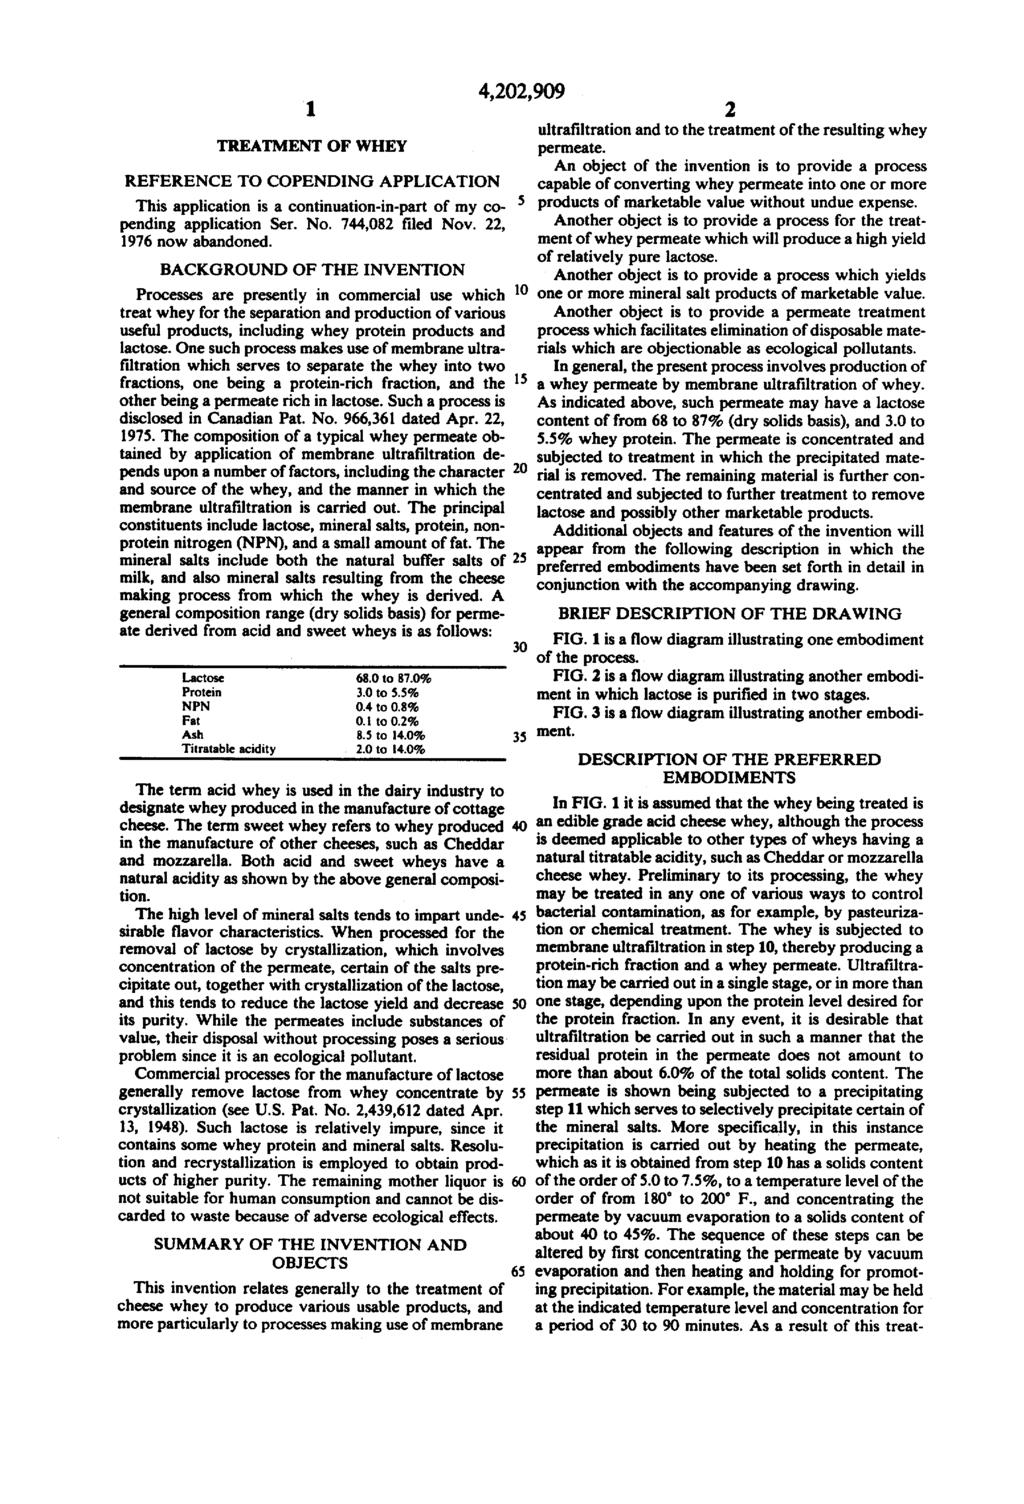 1. TREATMENT OF WHEY REFERENCE TO COPENDING APPLICATION This application is a continuation-in-part of my co pending application Ser. No. 744,082 filed Nov. 22, 1976 now abandoned.